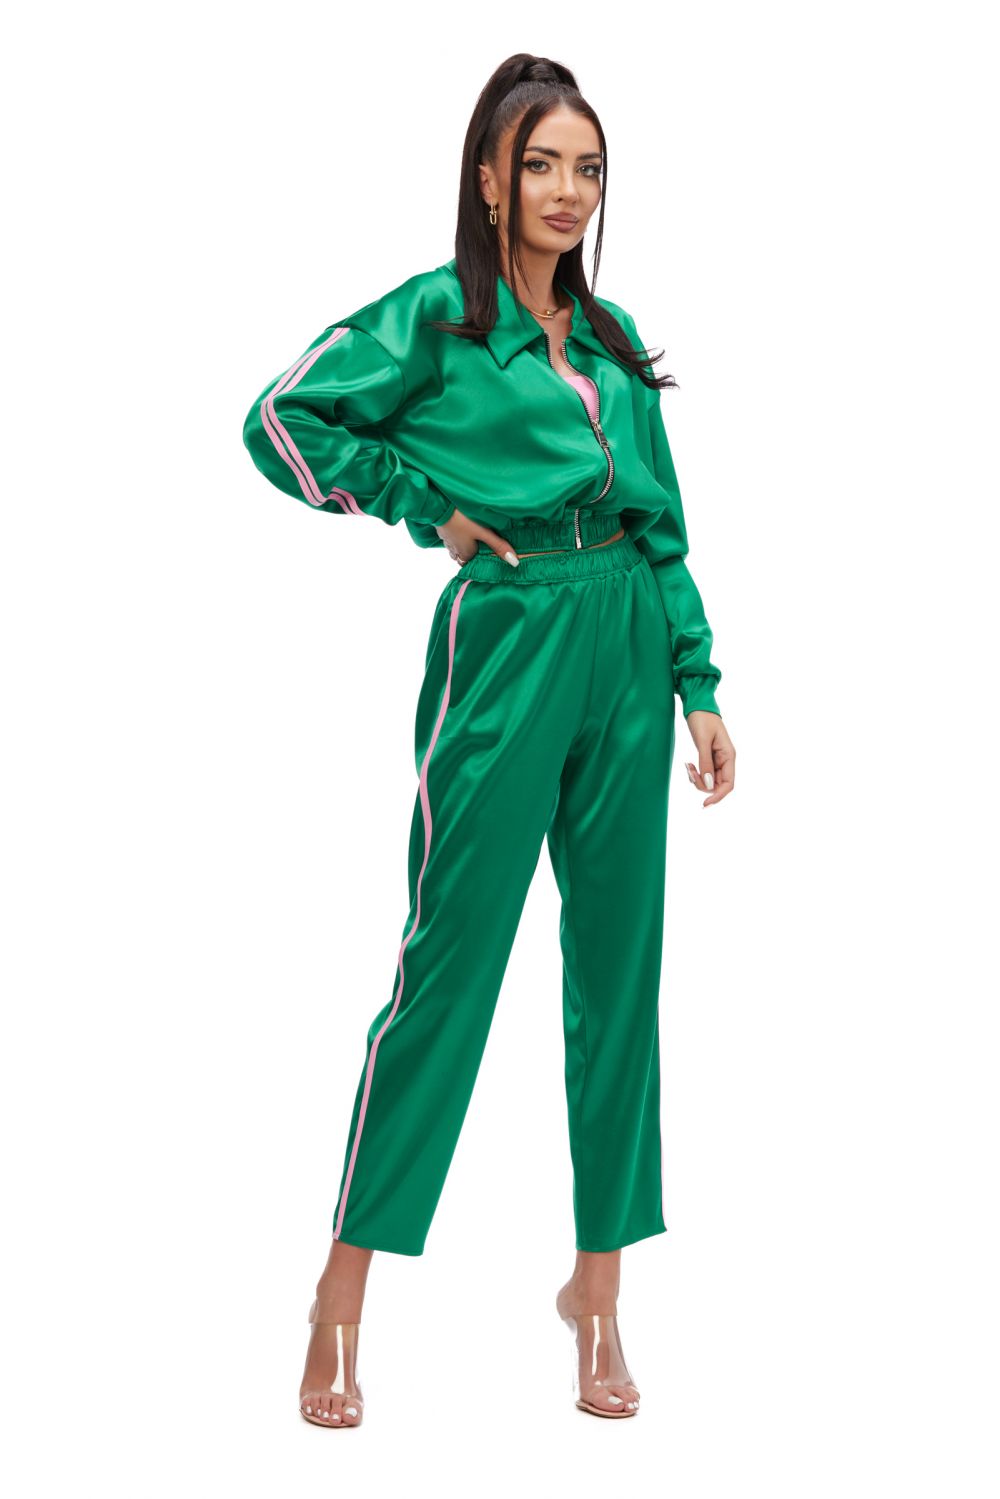 Pericla Bogas green casual lady's tracksuit